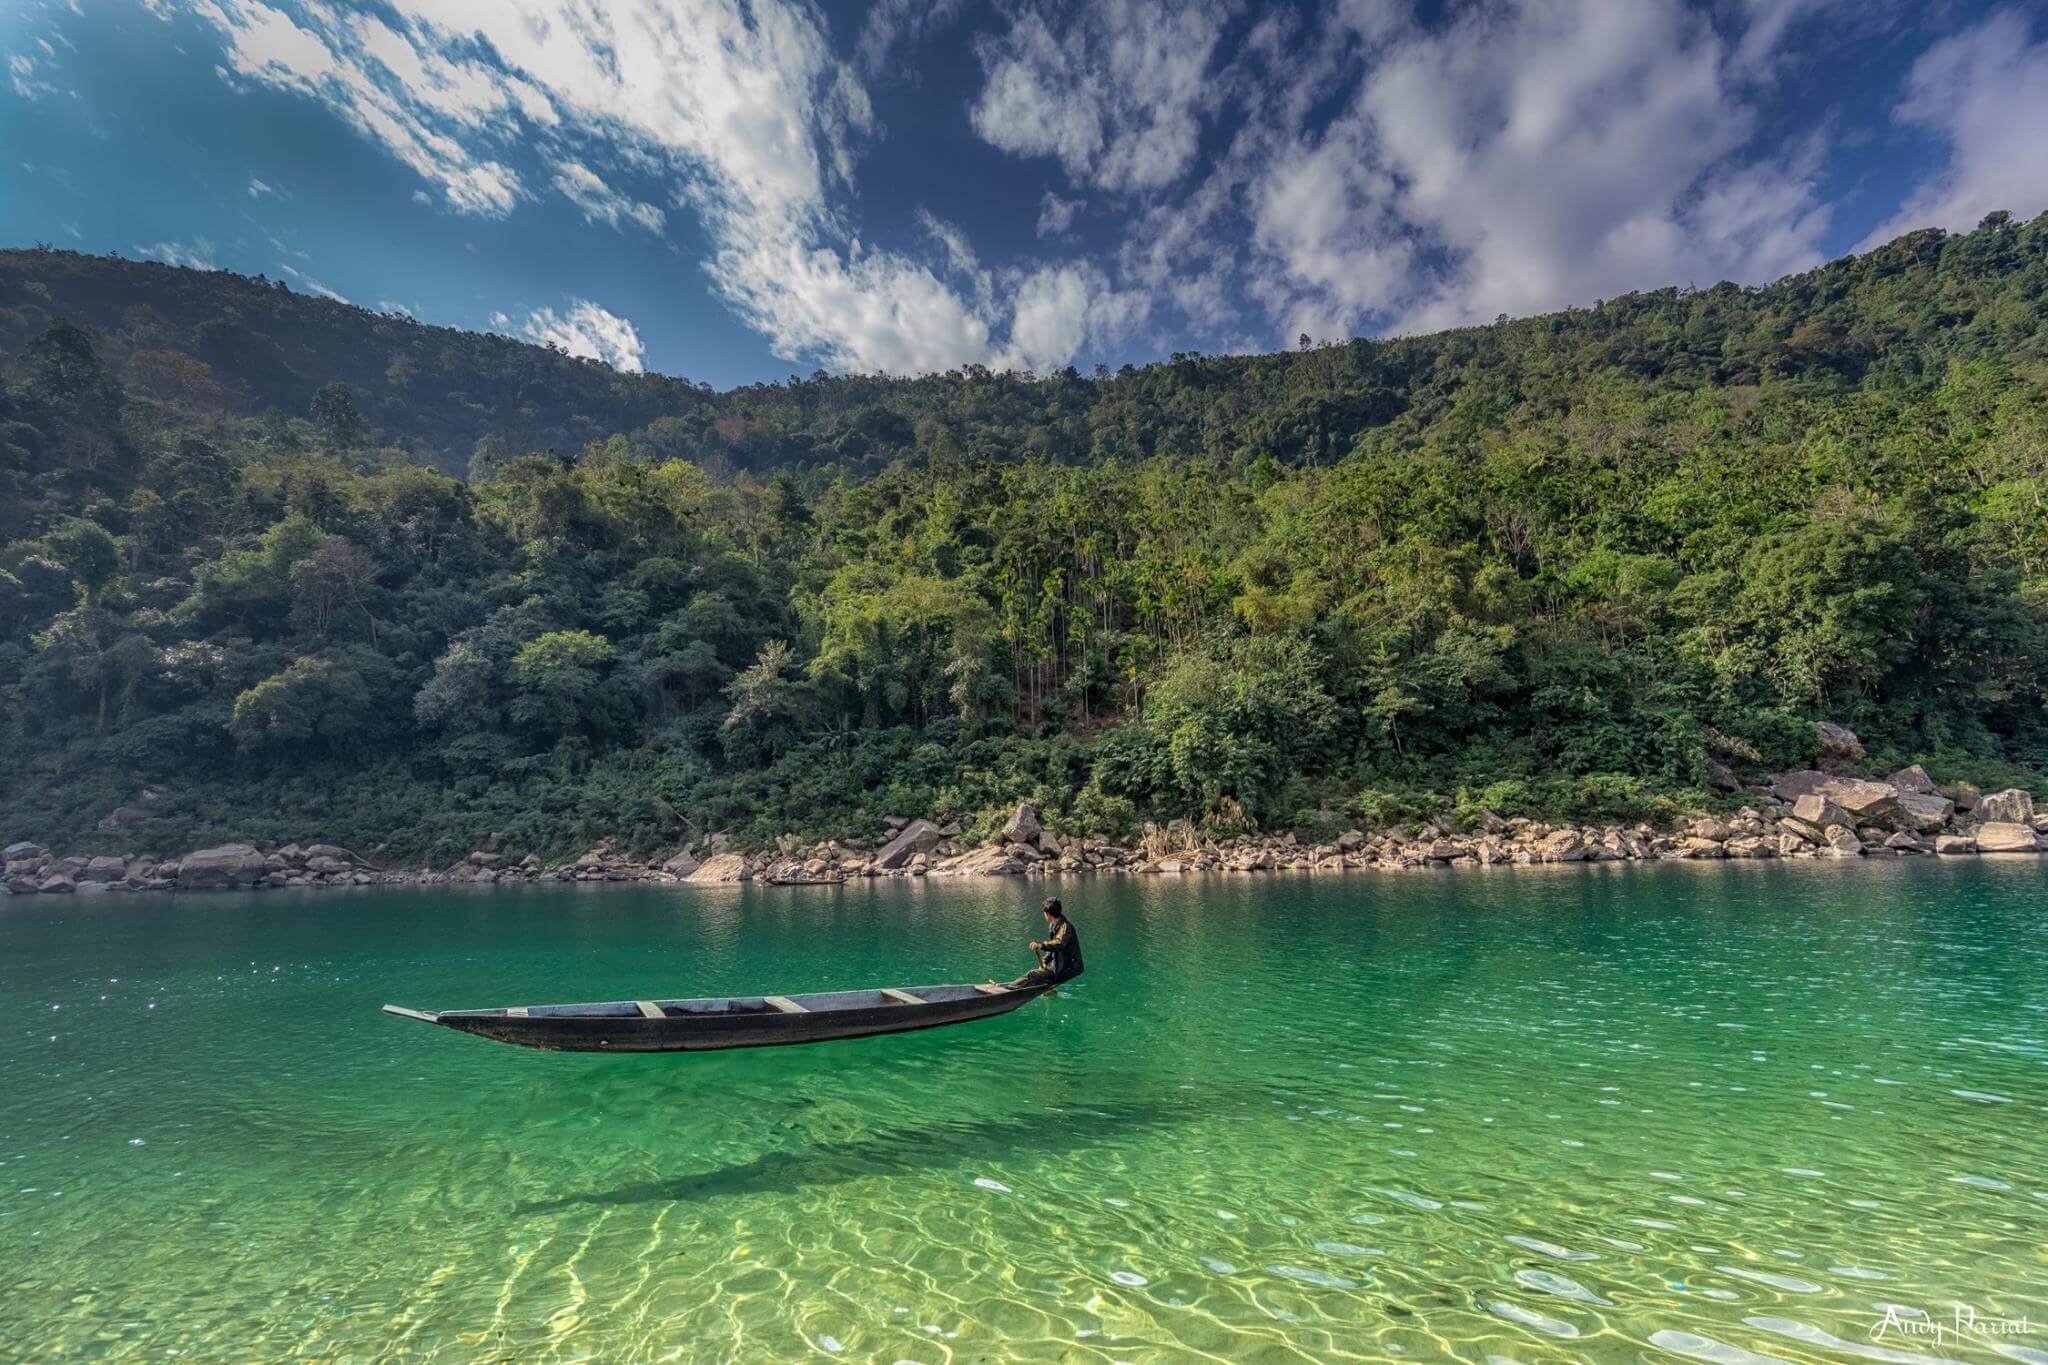 Meghalaya Tourism: A Backpackers’ Traveling Guide